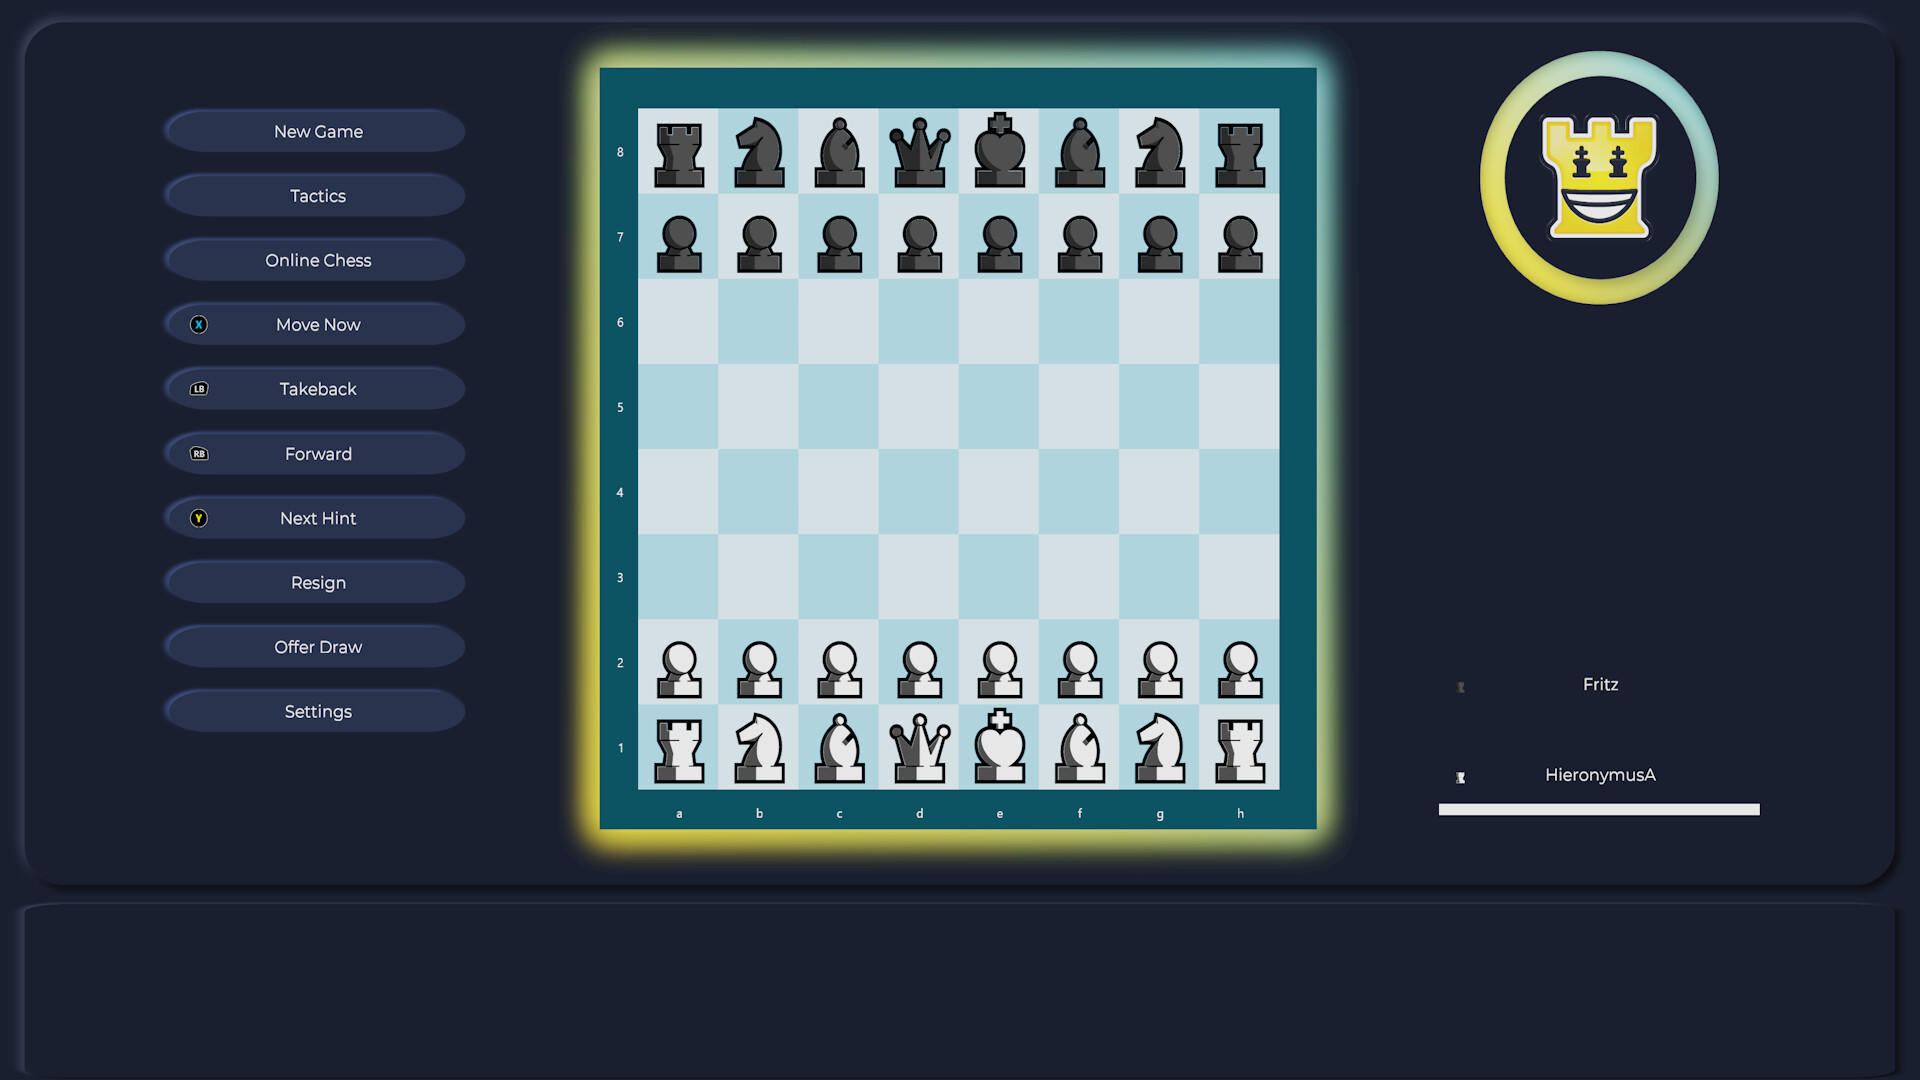 Chess on Cool Math Games isdifferent 